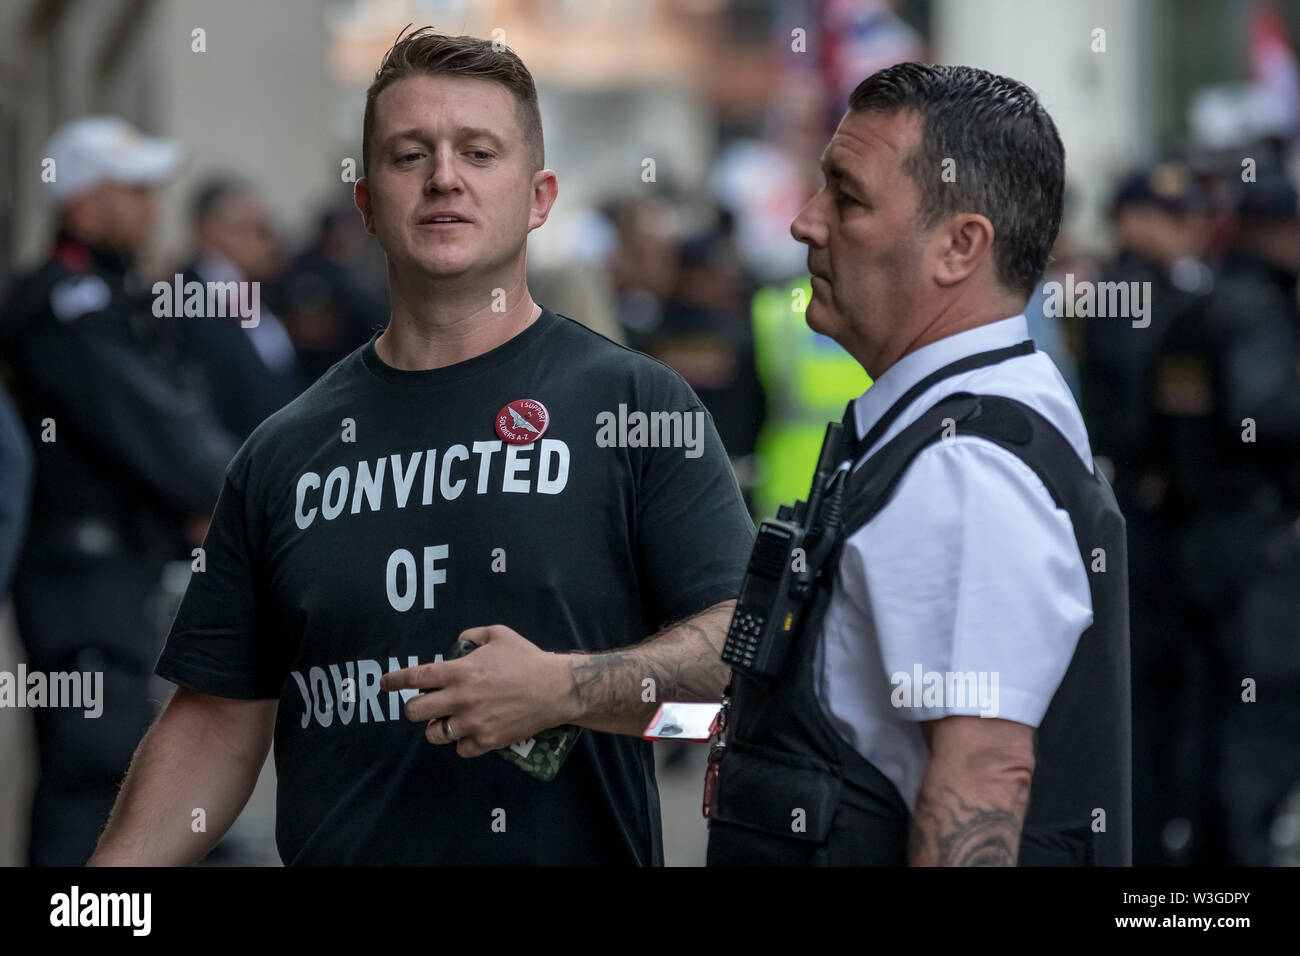 London, UK. 11th July 2019. Tommy Robinson, real name Stephen Yaxley-Lennon, arrives at Old Bailey court with a prison bag ready for sentencing after being found guilty of contempt of court over the filming outside Leeds Crown Court during a criminal trial last year and broadcasting live on social media. Credit: Guy Corbishley/Alamy Live News Stock Photo